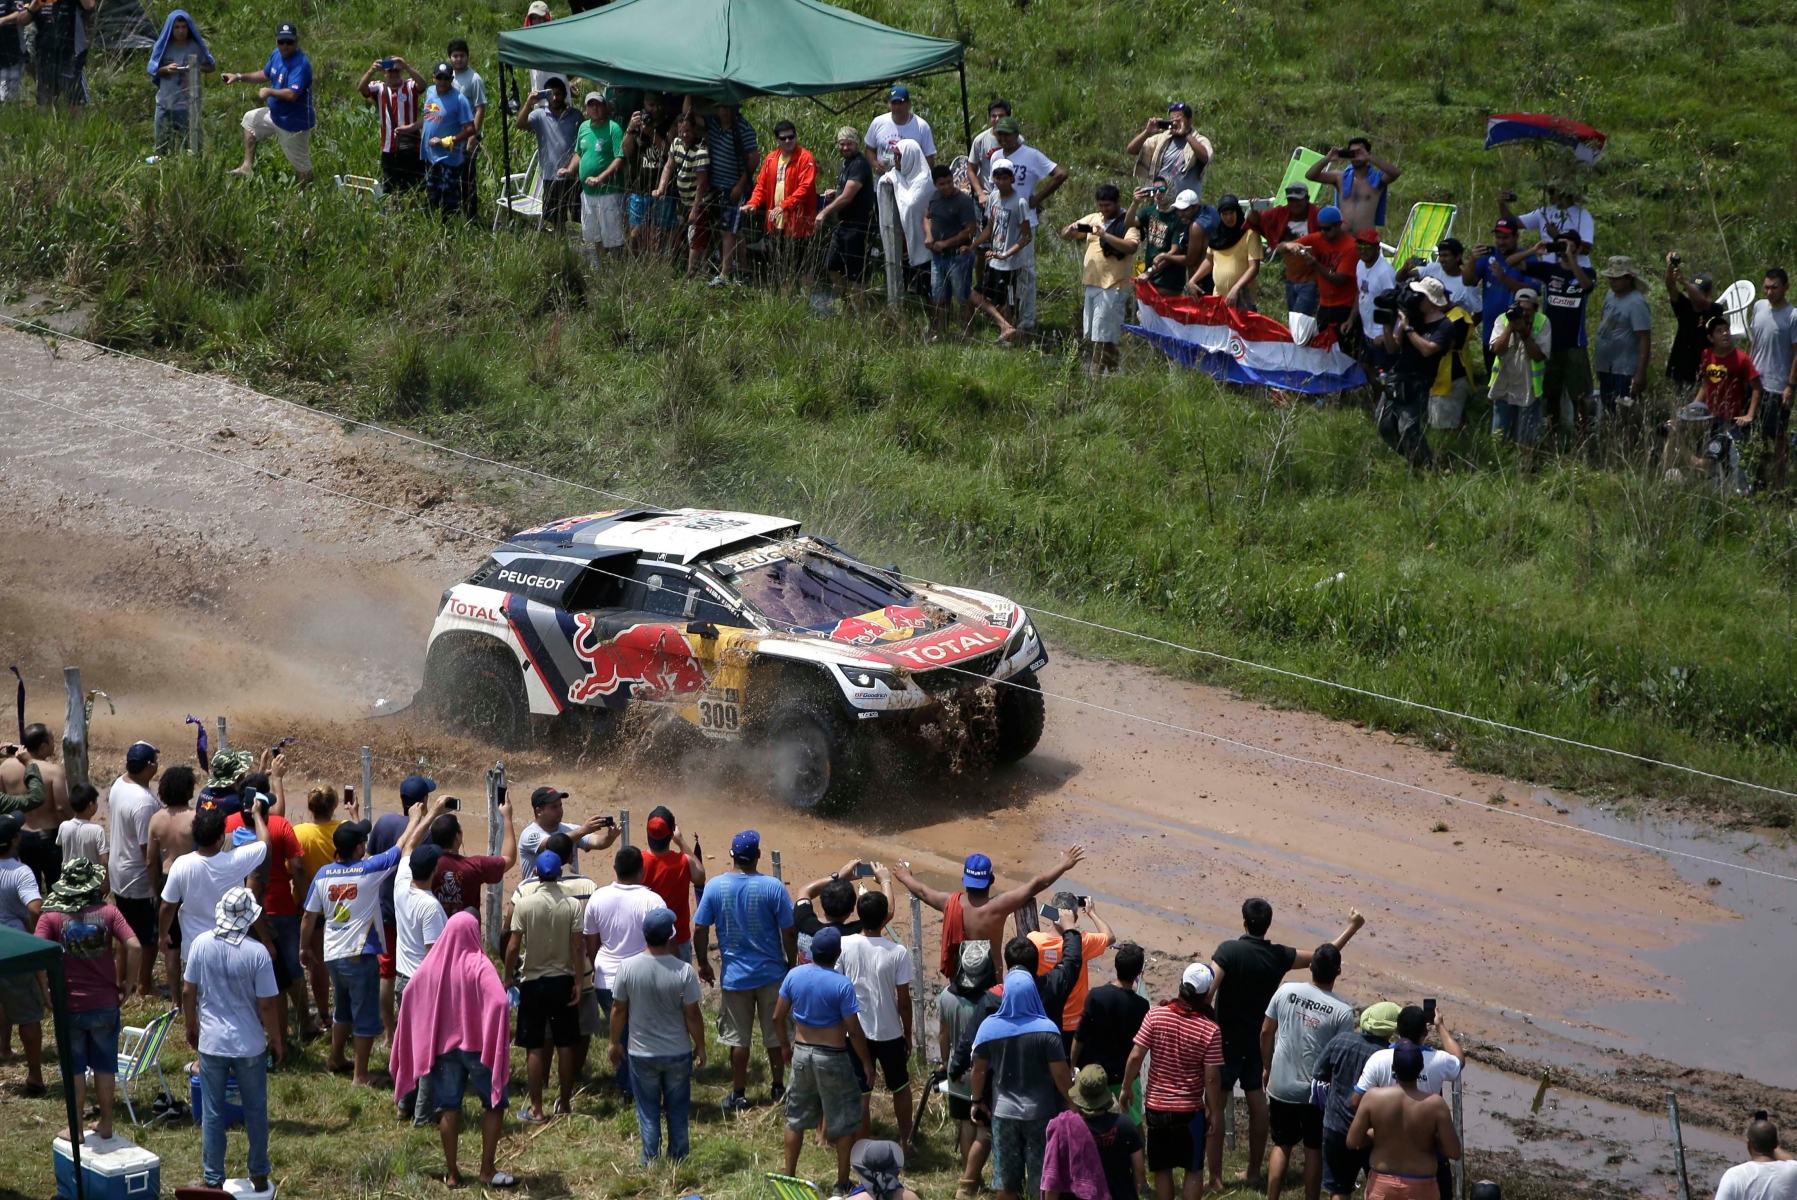 Spectators watch driver Sebastien Loeb, of France, and co-driver Daniel Elena, of Monaco, race their Peugeot during the first stage of the Dakar Rally between Asuncion, Paraguay and Resistencia, Argentina, Monday, Jan. 2, 2017. The race will pass through Bolivia as well. (AP Photo/Martin Mejia) Paraguay Dakar Rally